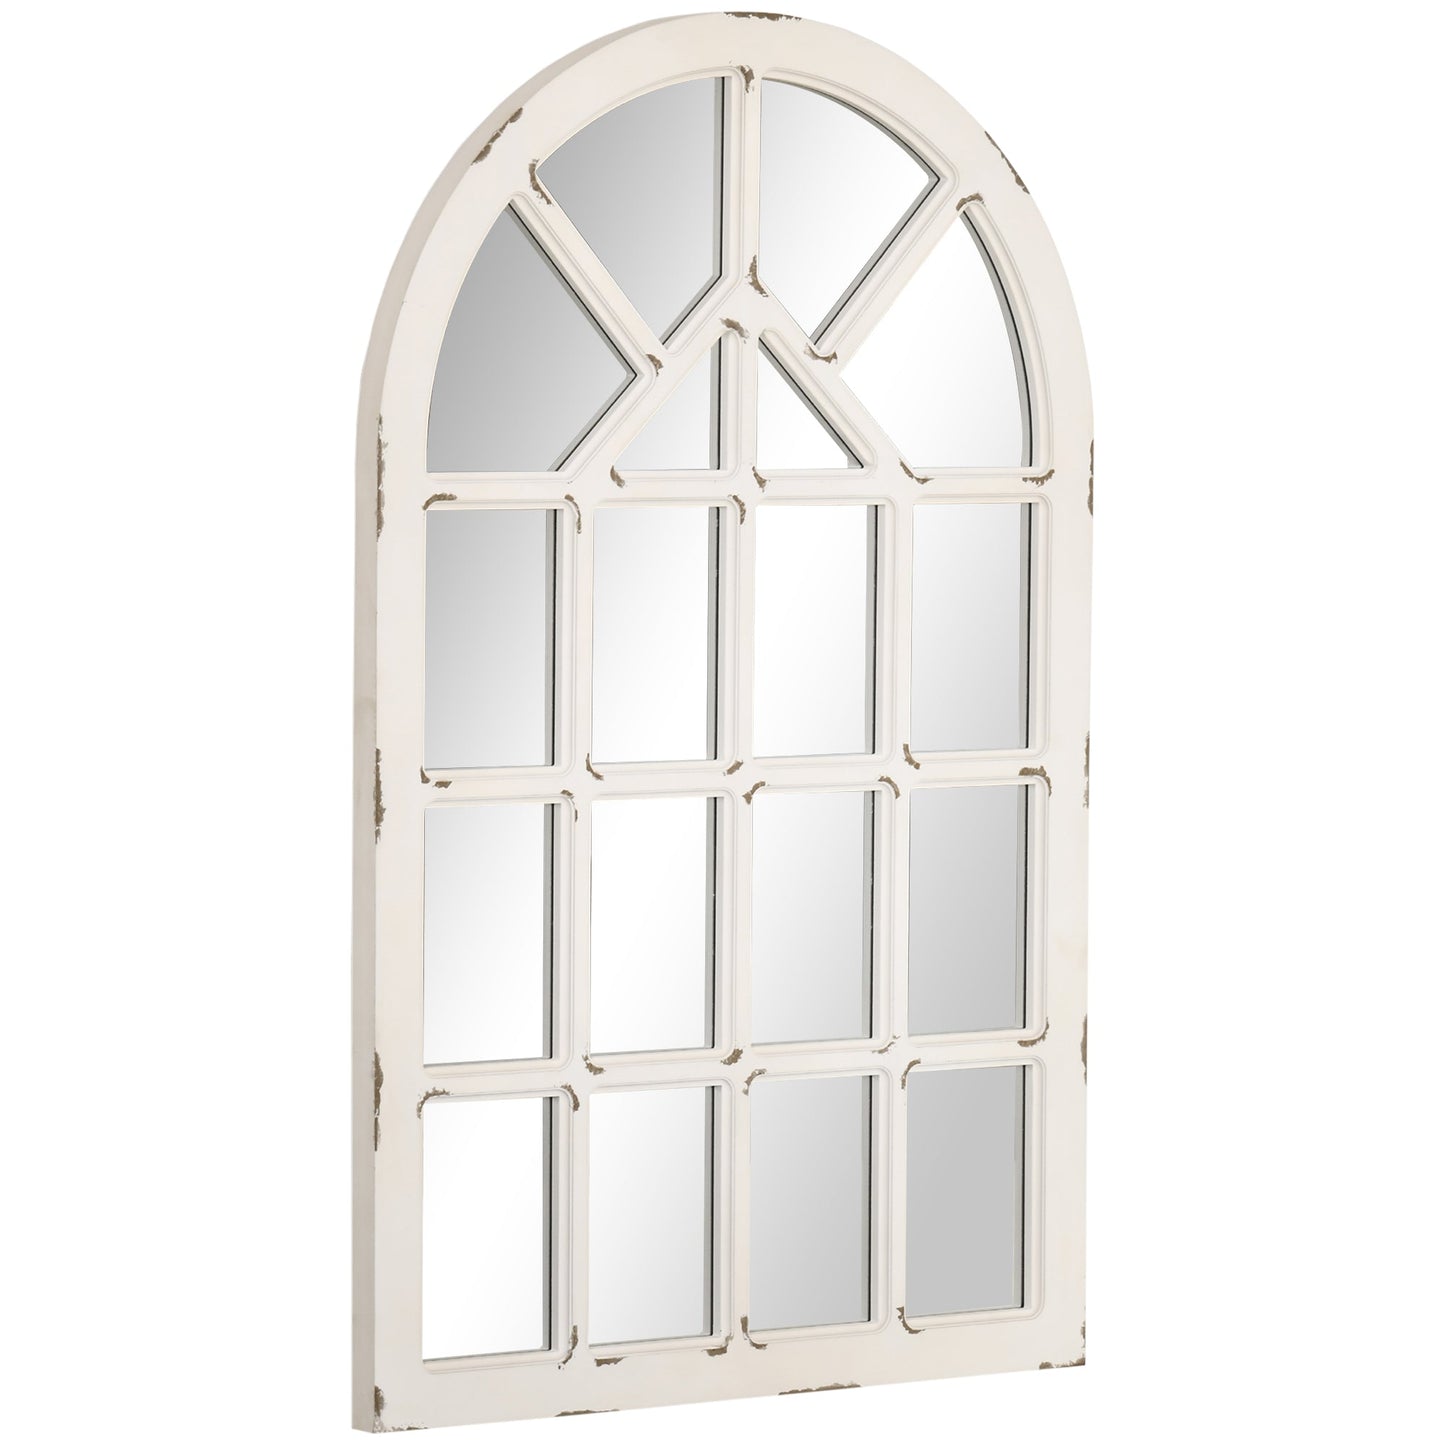 43x27.5 inch Decorative Wall Mirror, Arch Windowpane Mirror for Wall in Living Room, Bedroom, Rustic White at Gallery Canada